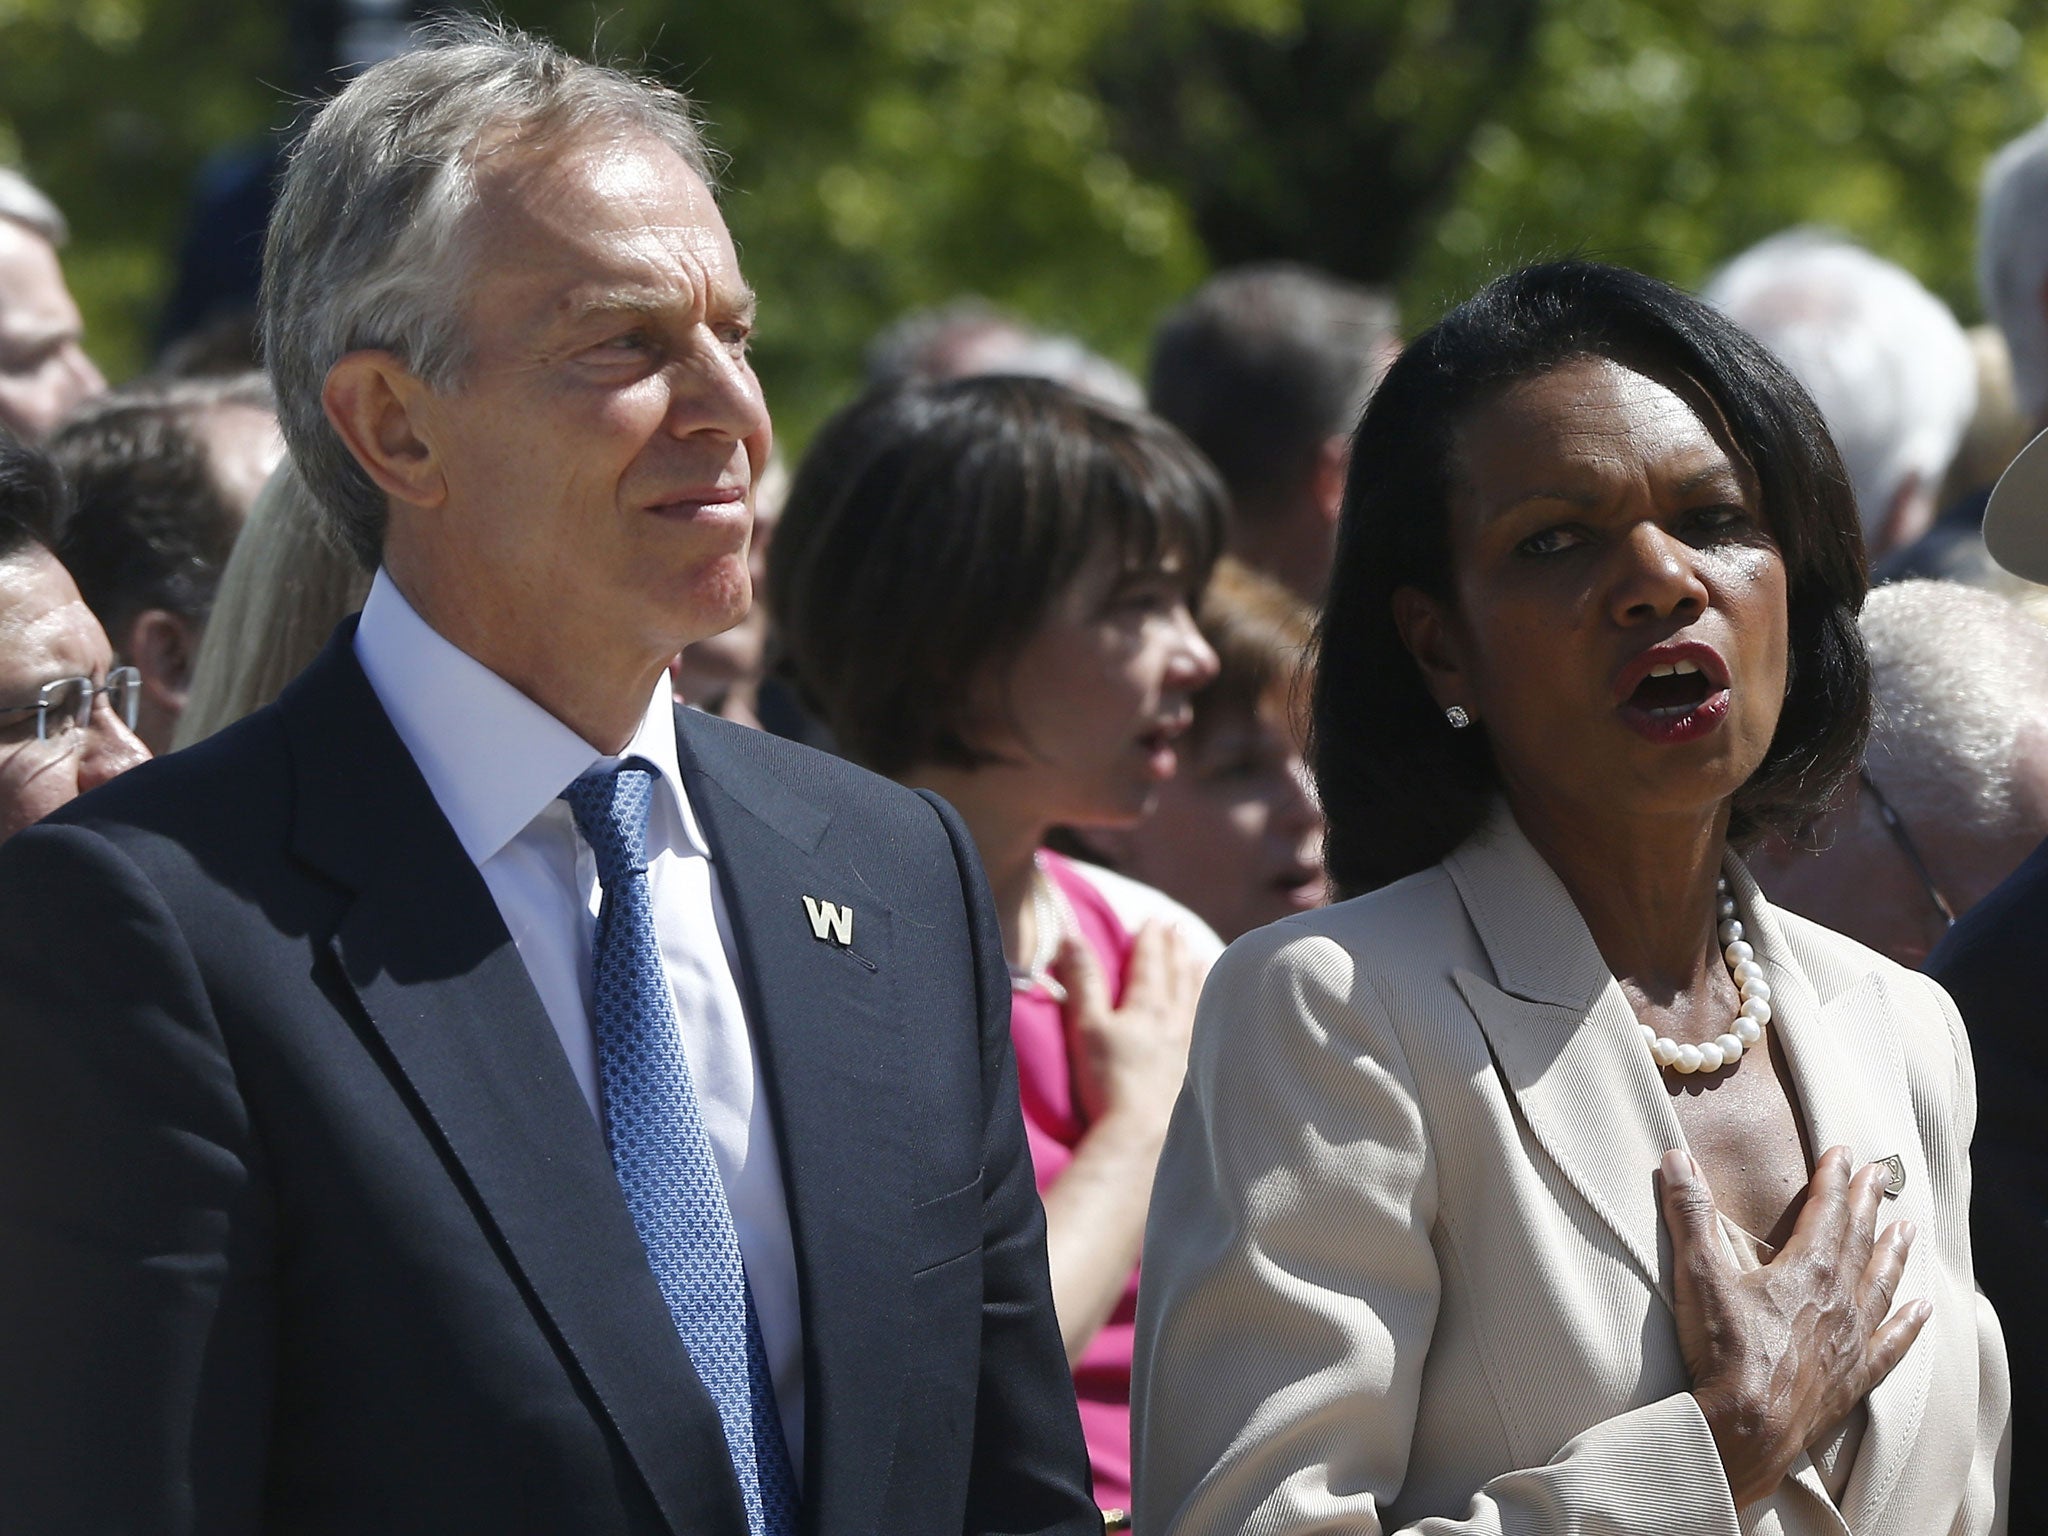 Former Prime Minister Tony Blair stands next to former Secretary of State Condoleezza Rice, at the opening of the George W Bush Library